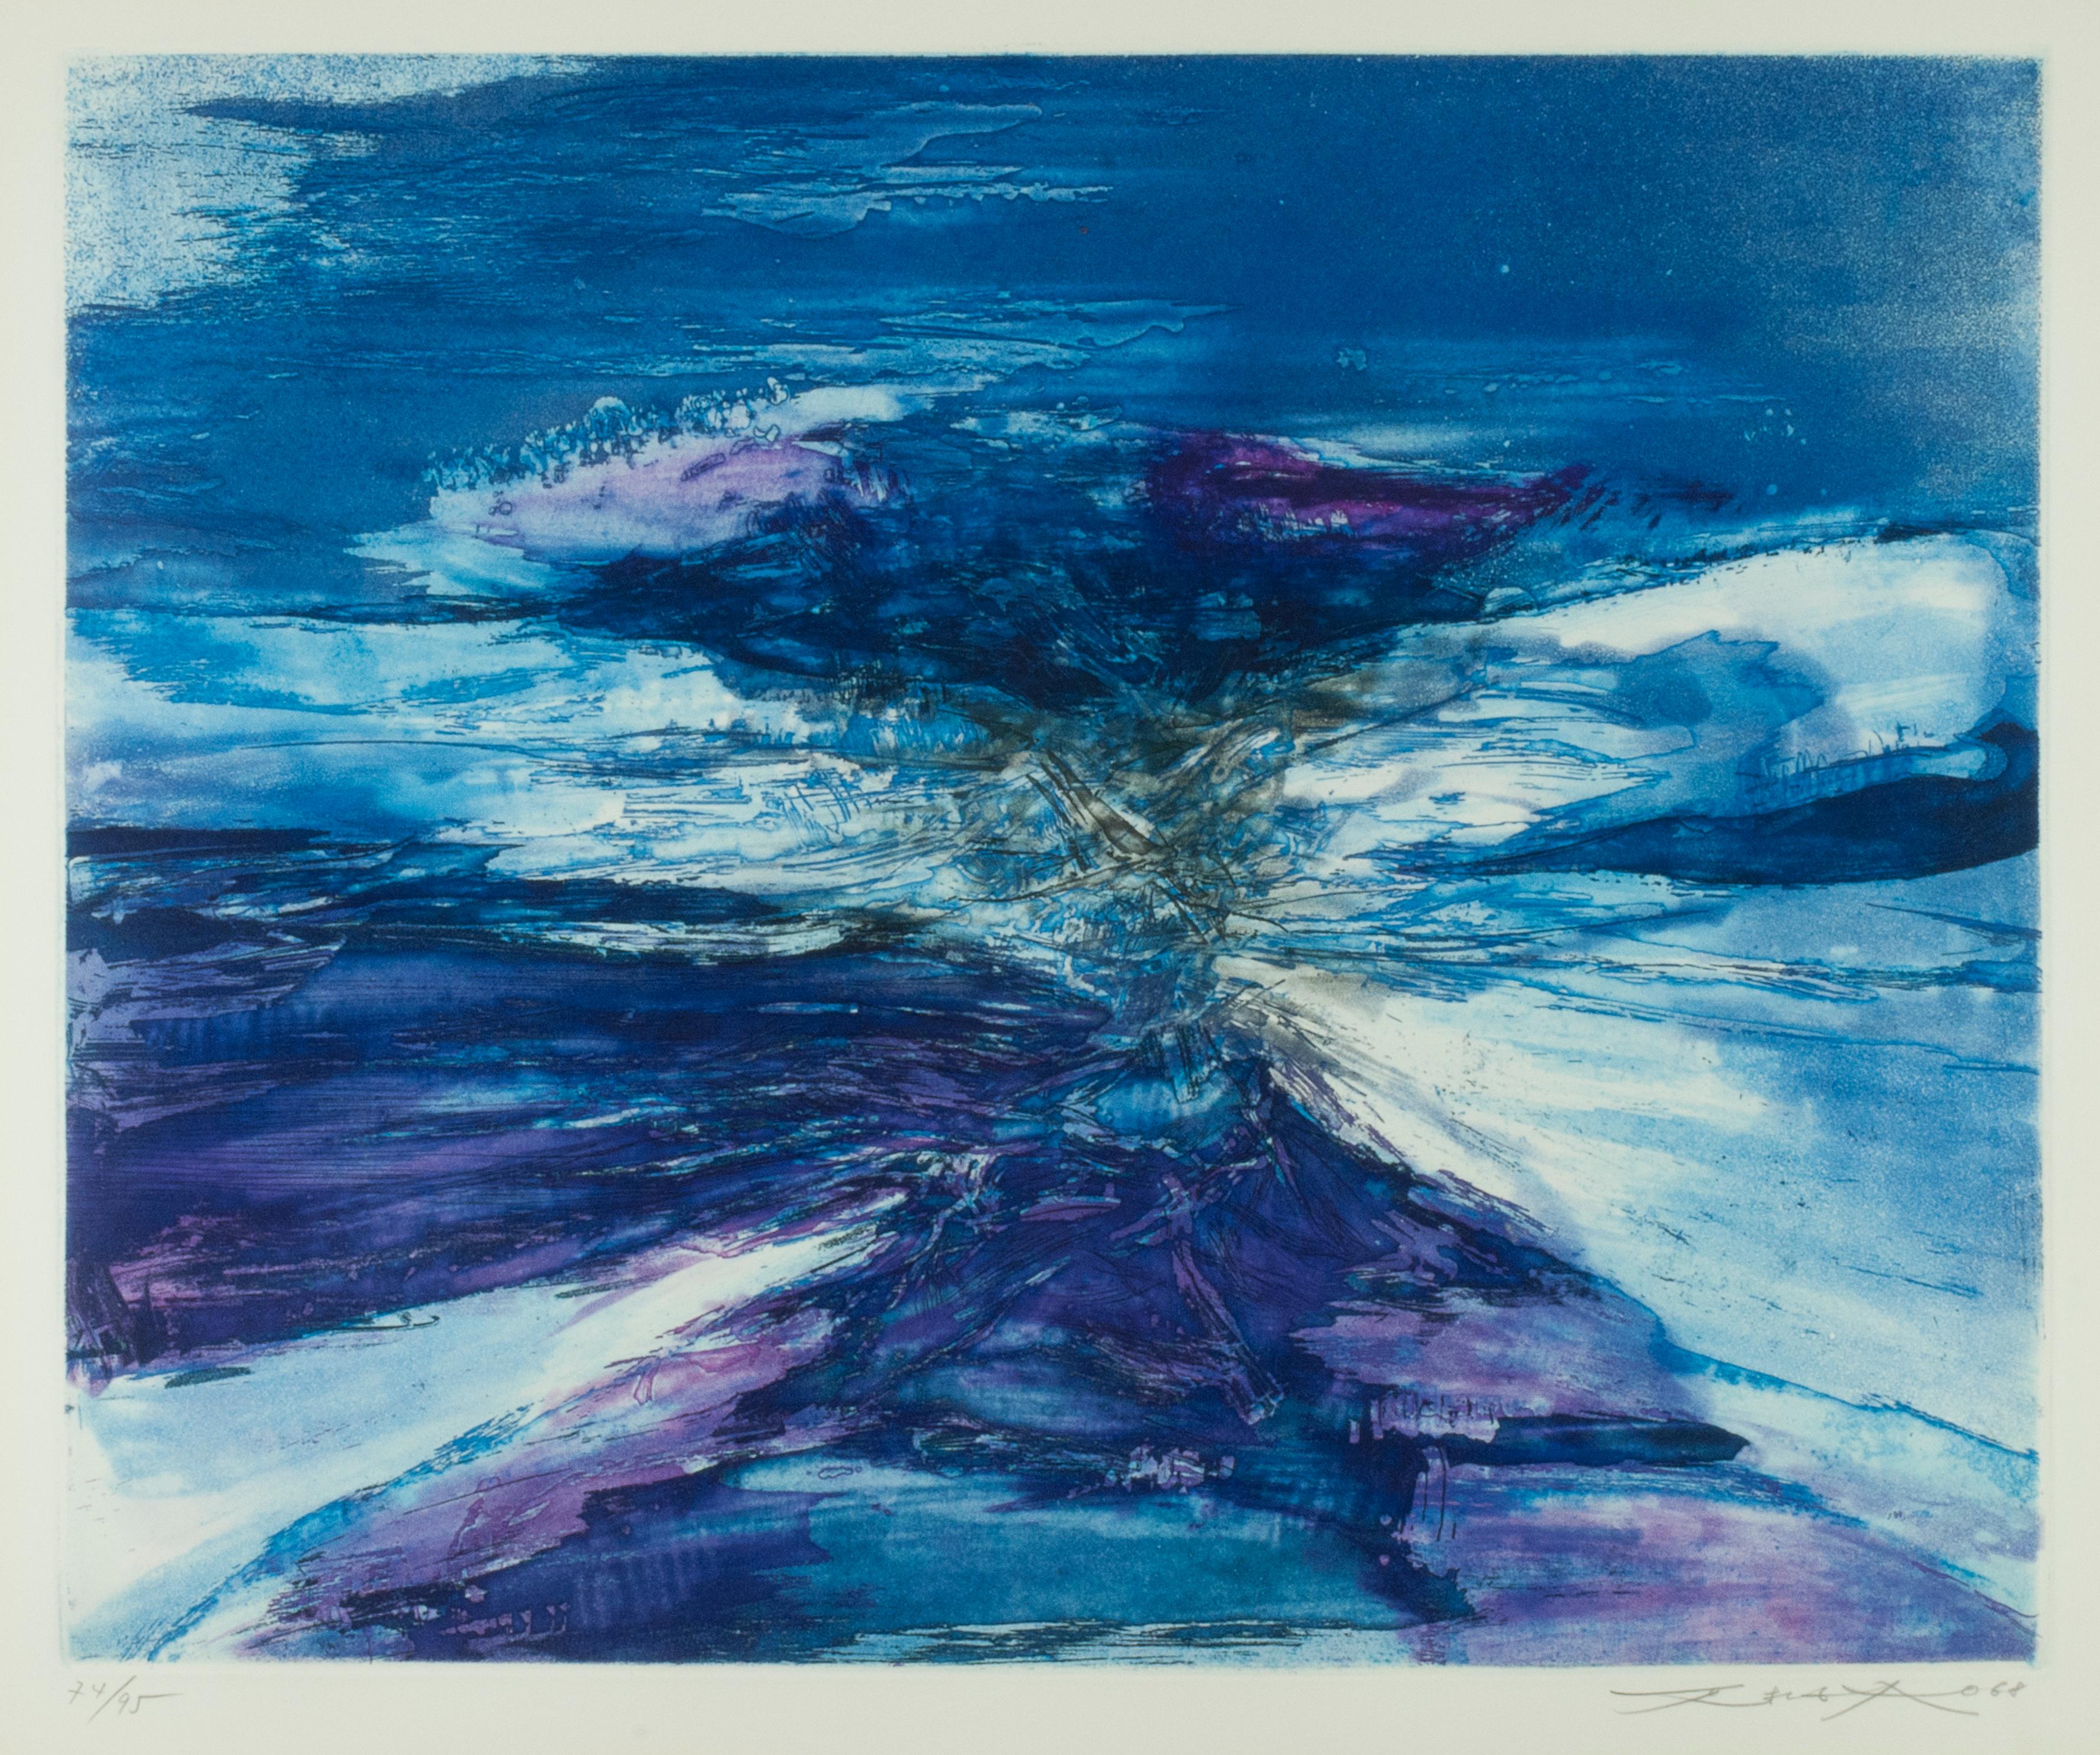 Zao Wou-Ki Abstract Print - Blue Rythms (Agerup 188)  after the 1966 painting, Peinture.